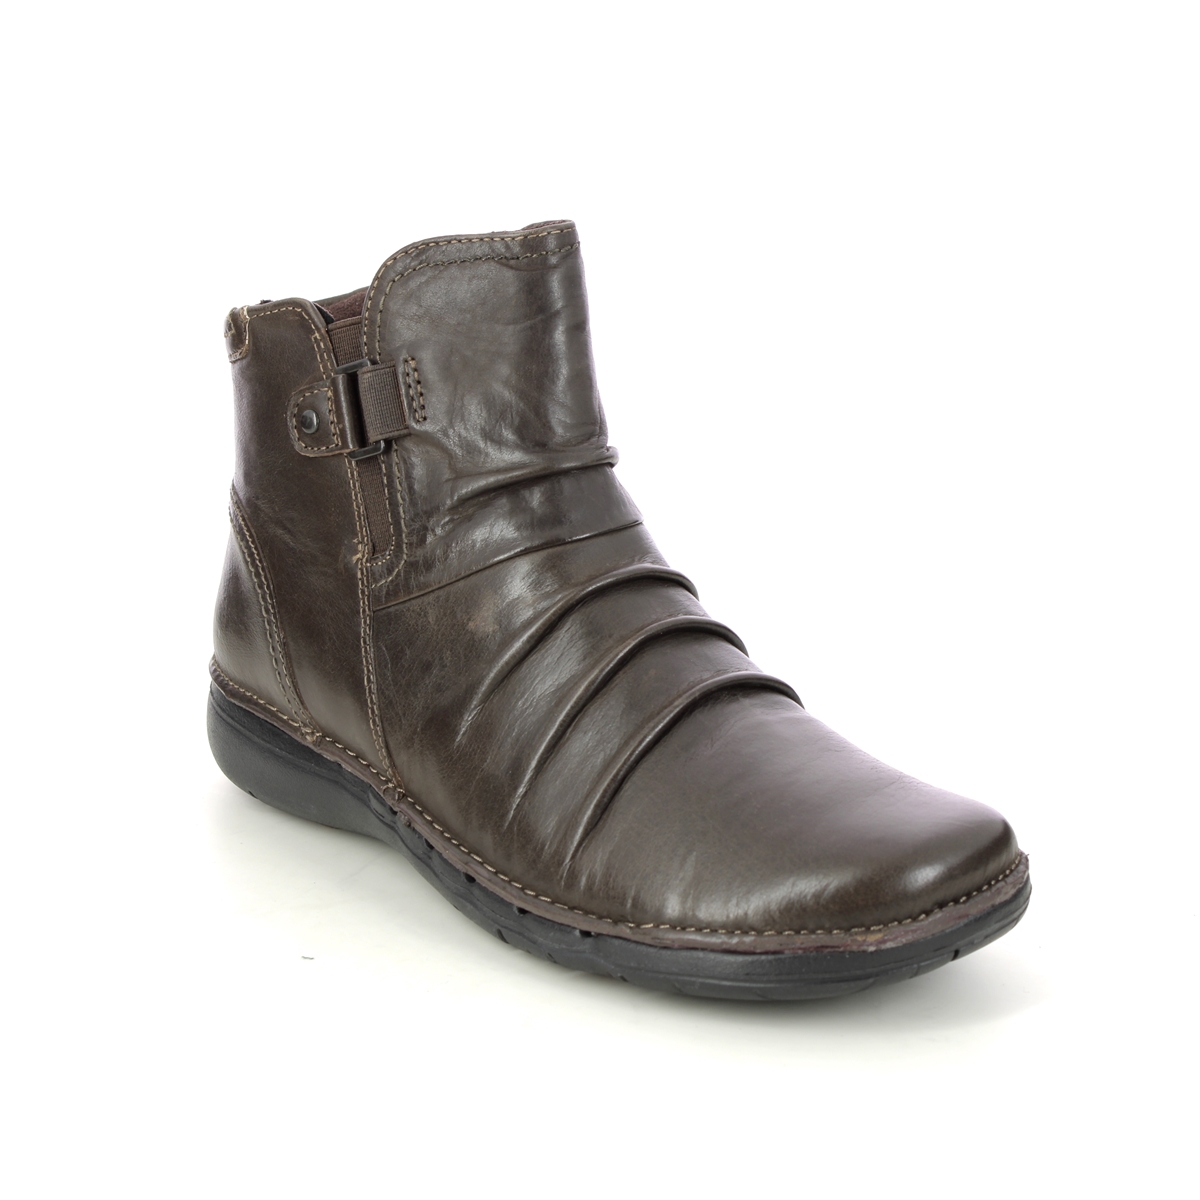 Clarks Un Loop Top Brown Leather Womens Ankle Boots 686624D In Size 6.5 In Plain Brown Leather